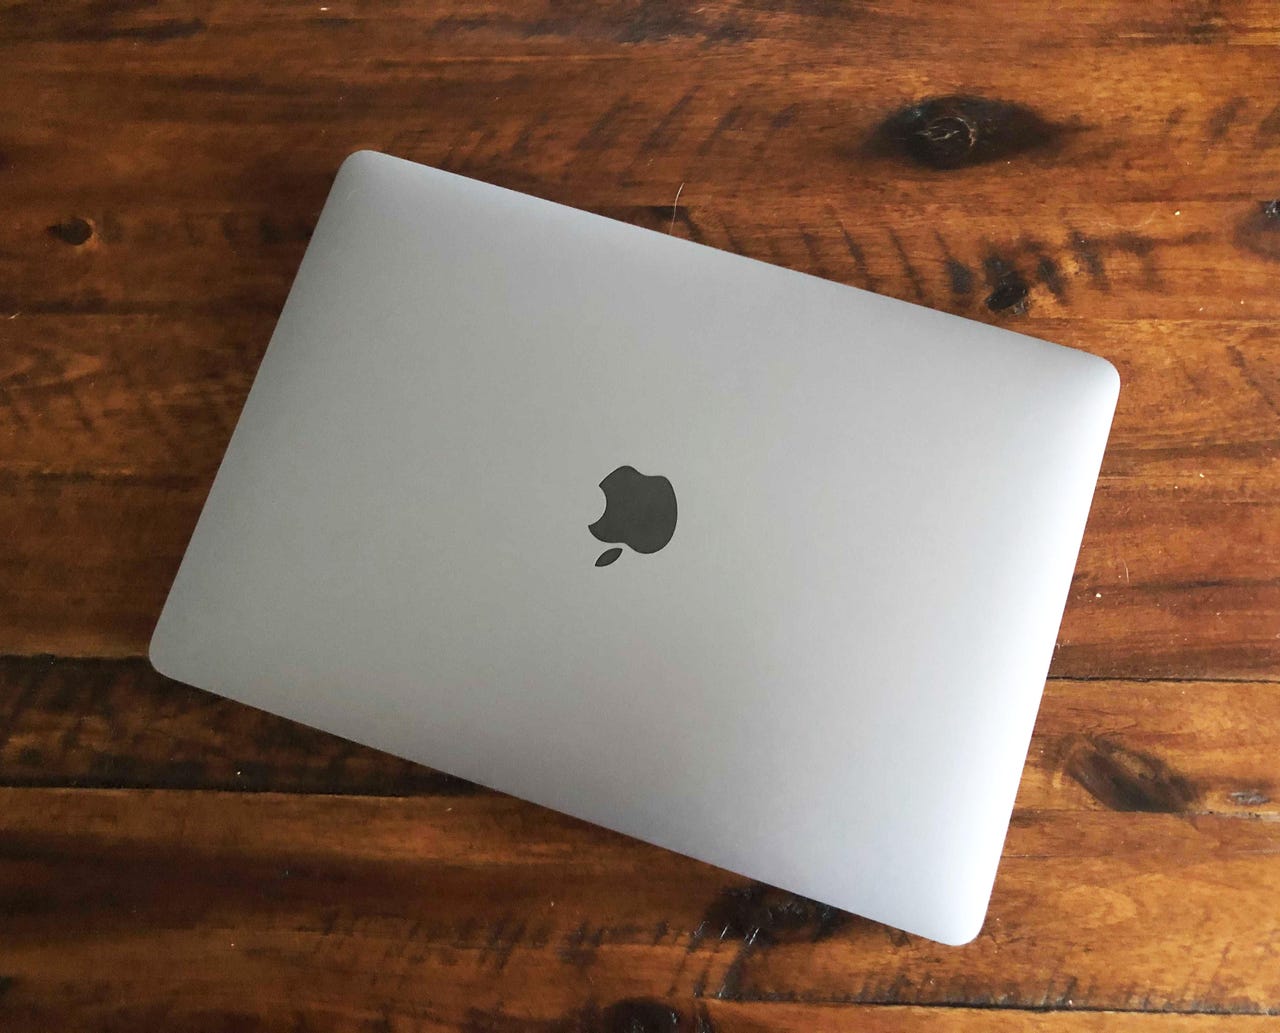 MacBook Air with M1 chip - Apple